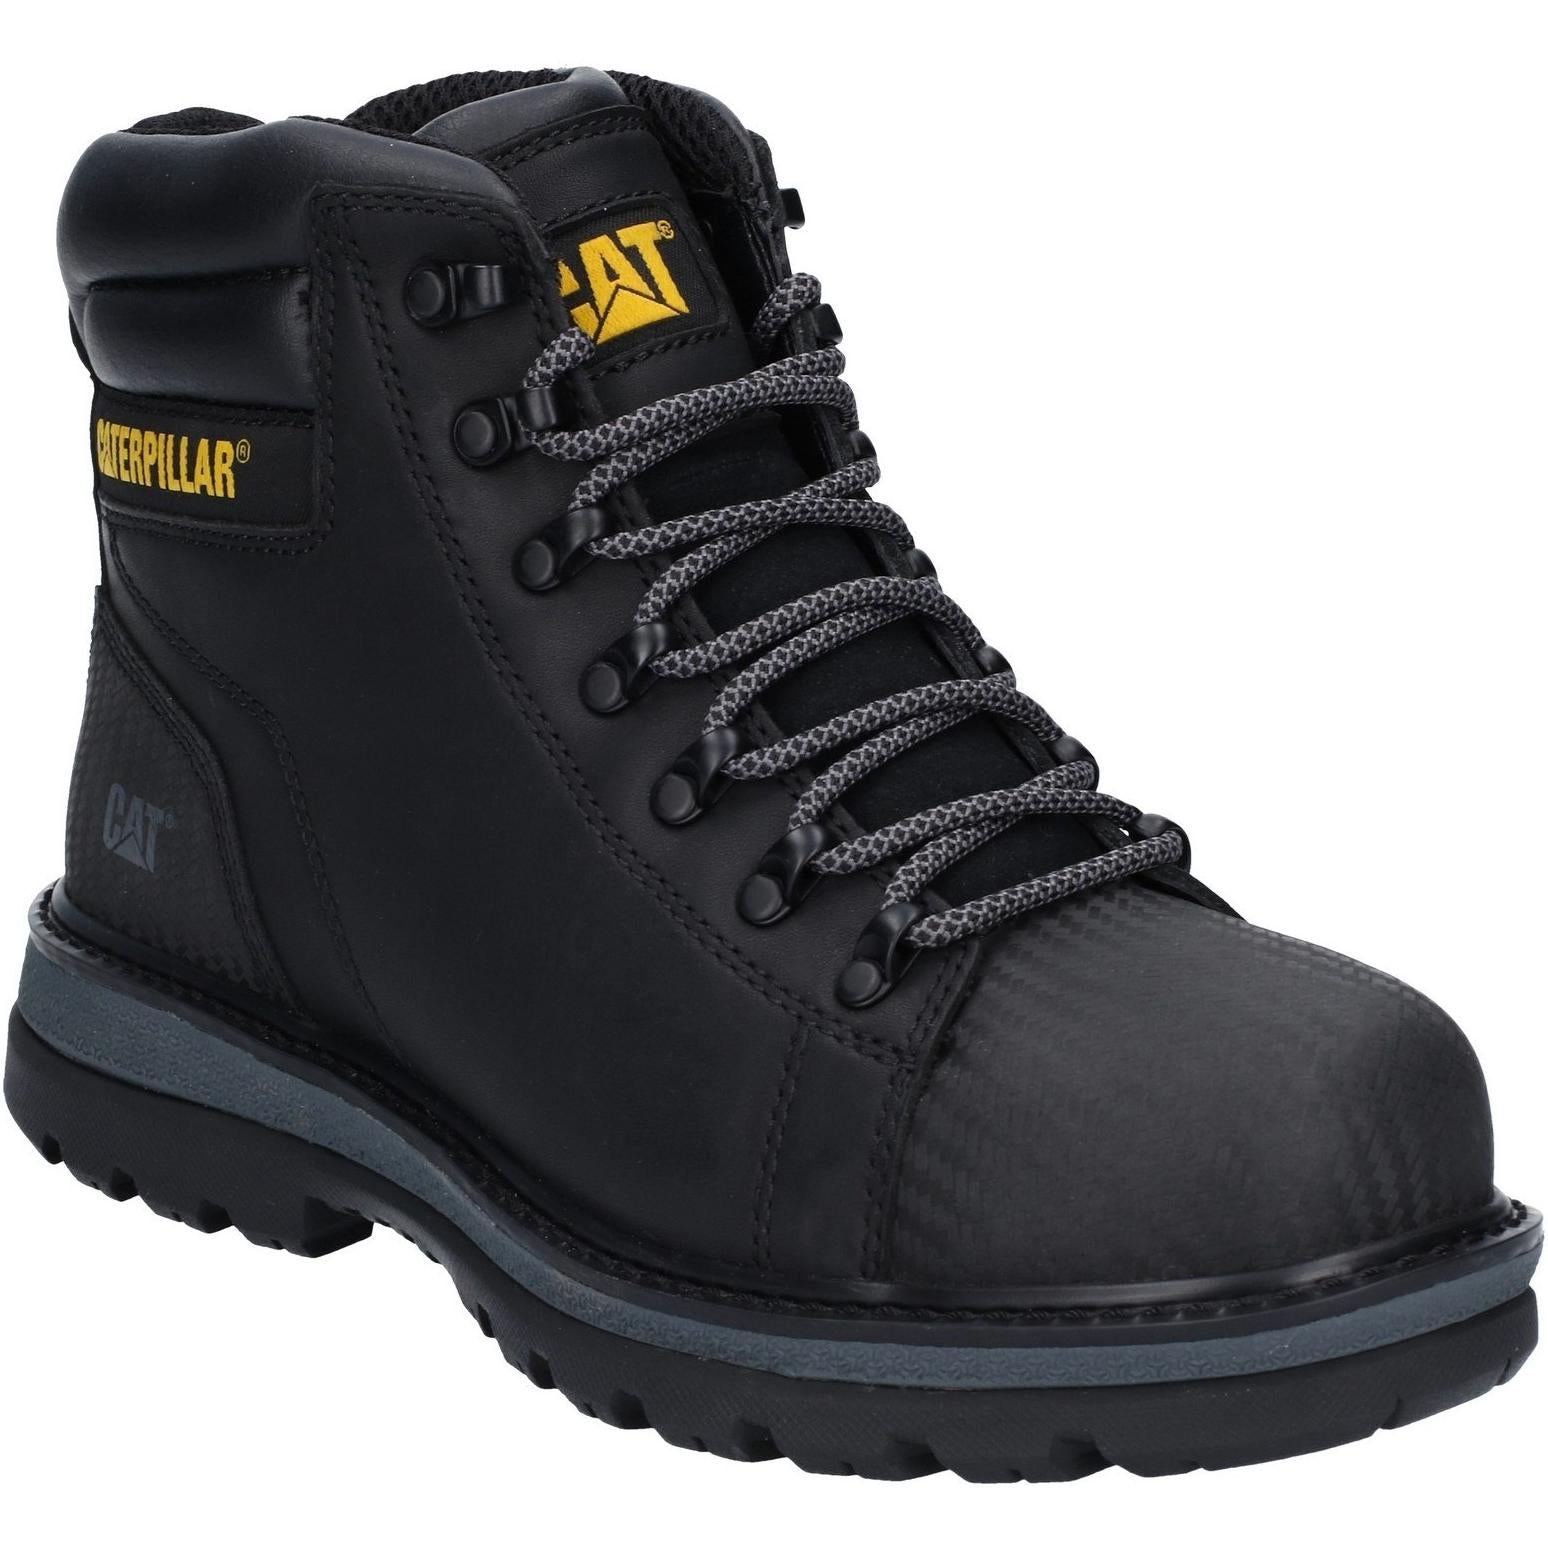 Caterpillar Foxfield Lace Up Safety Boot